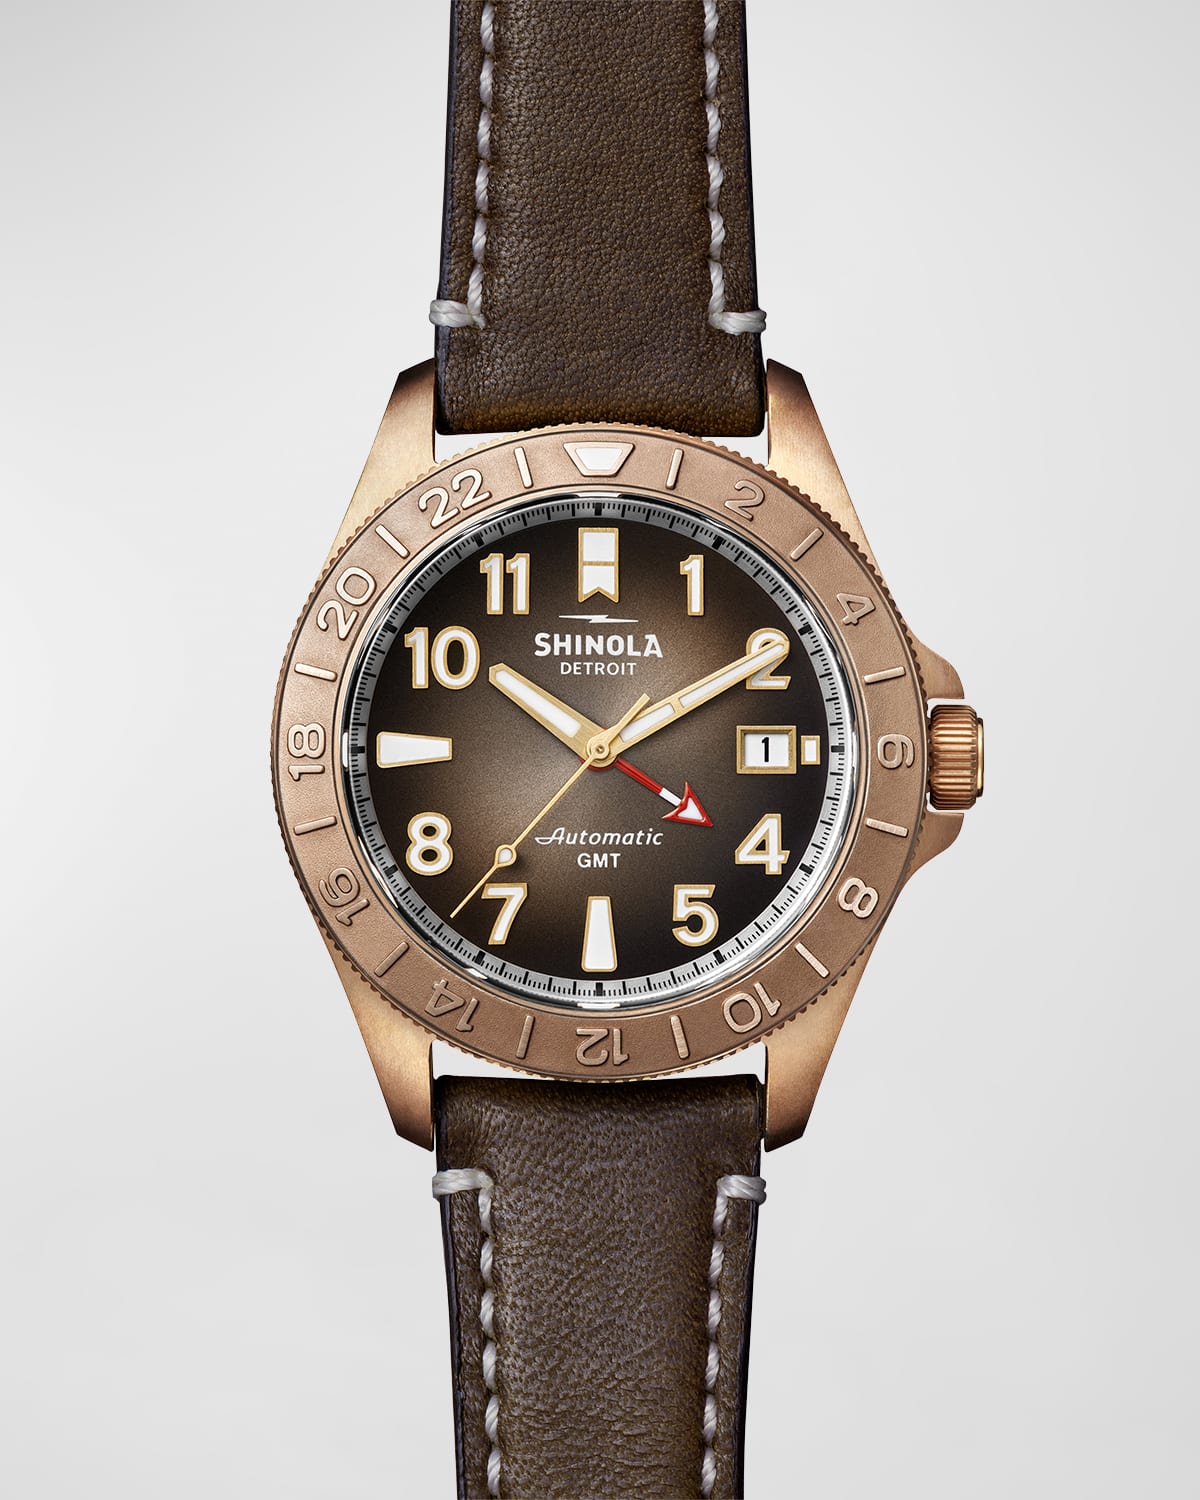 SHINOLA MEN'S BRONZE AUTOMATIC GMT WATCH WITH LEATHER AND NYLON STRAPS